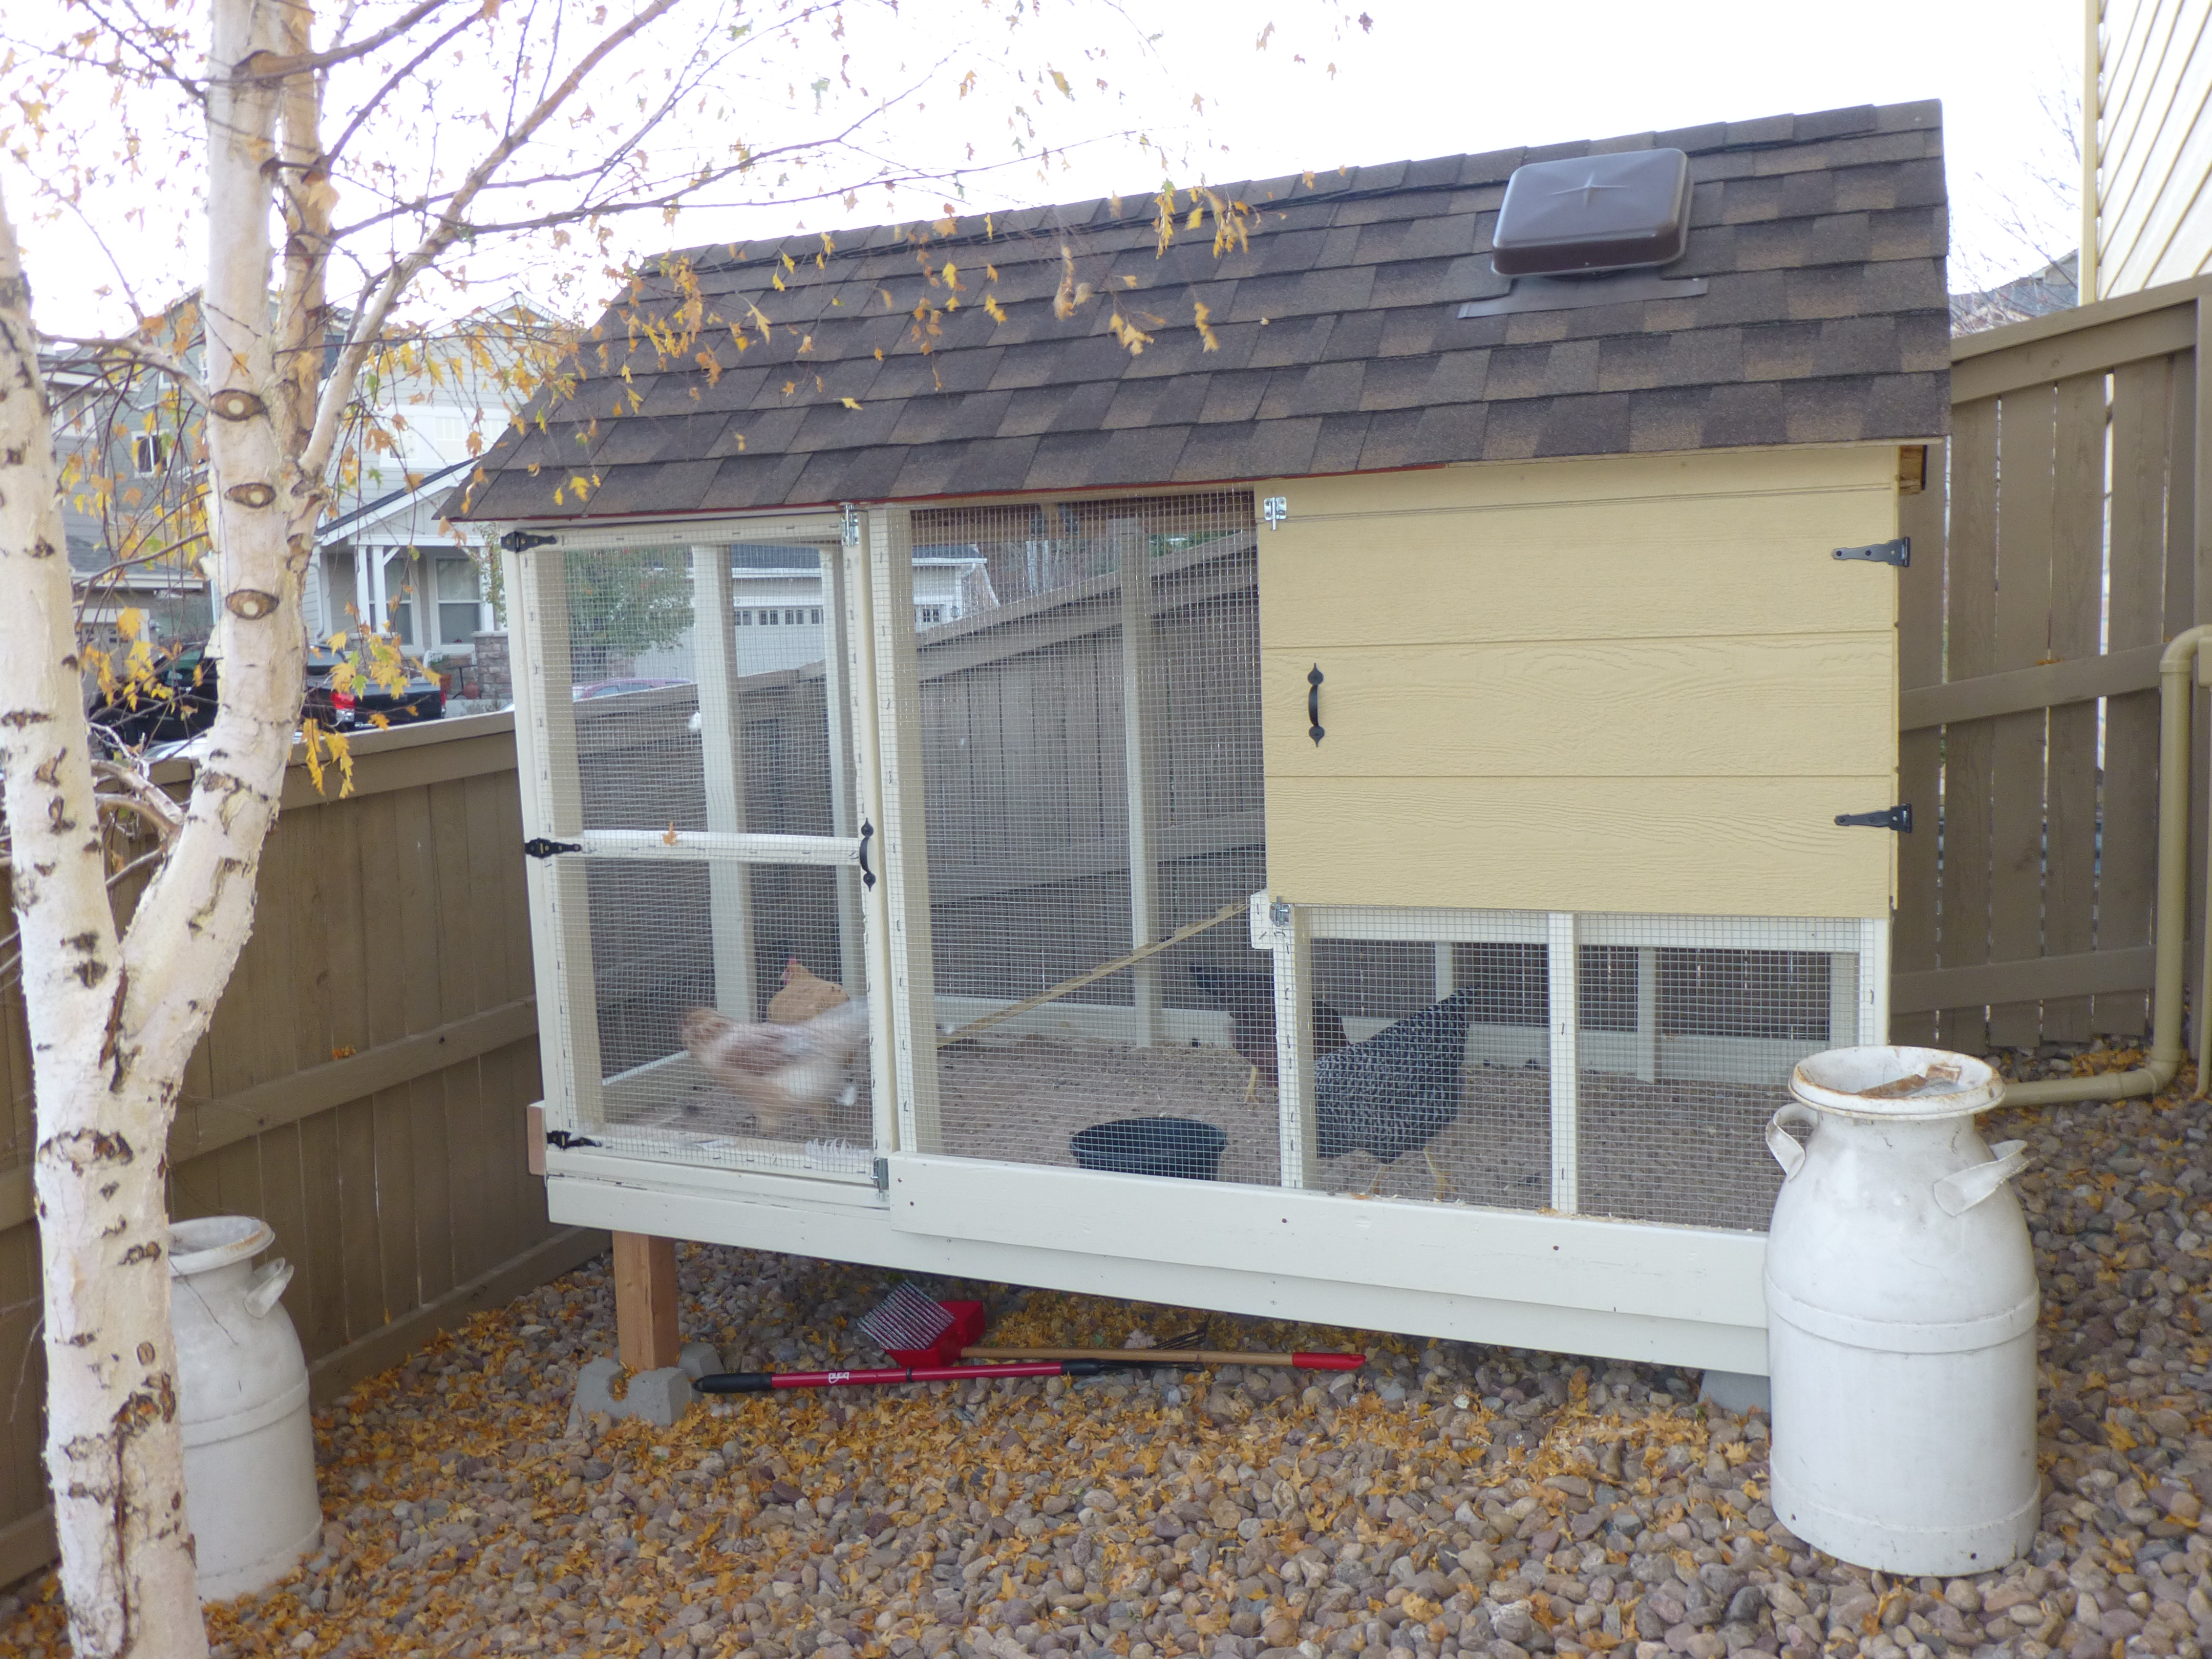 Almost finished Chicken coop.  Just a few remaining finishes like trim, steps etc.